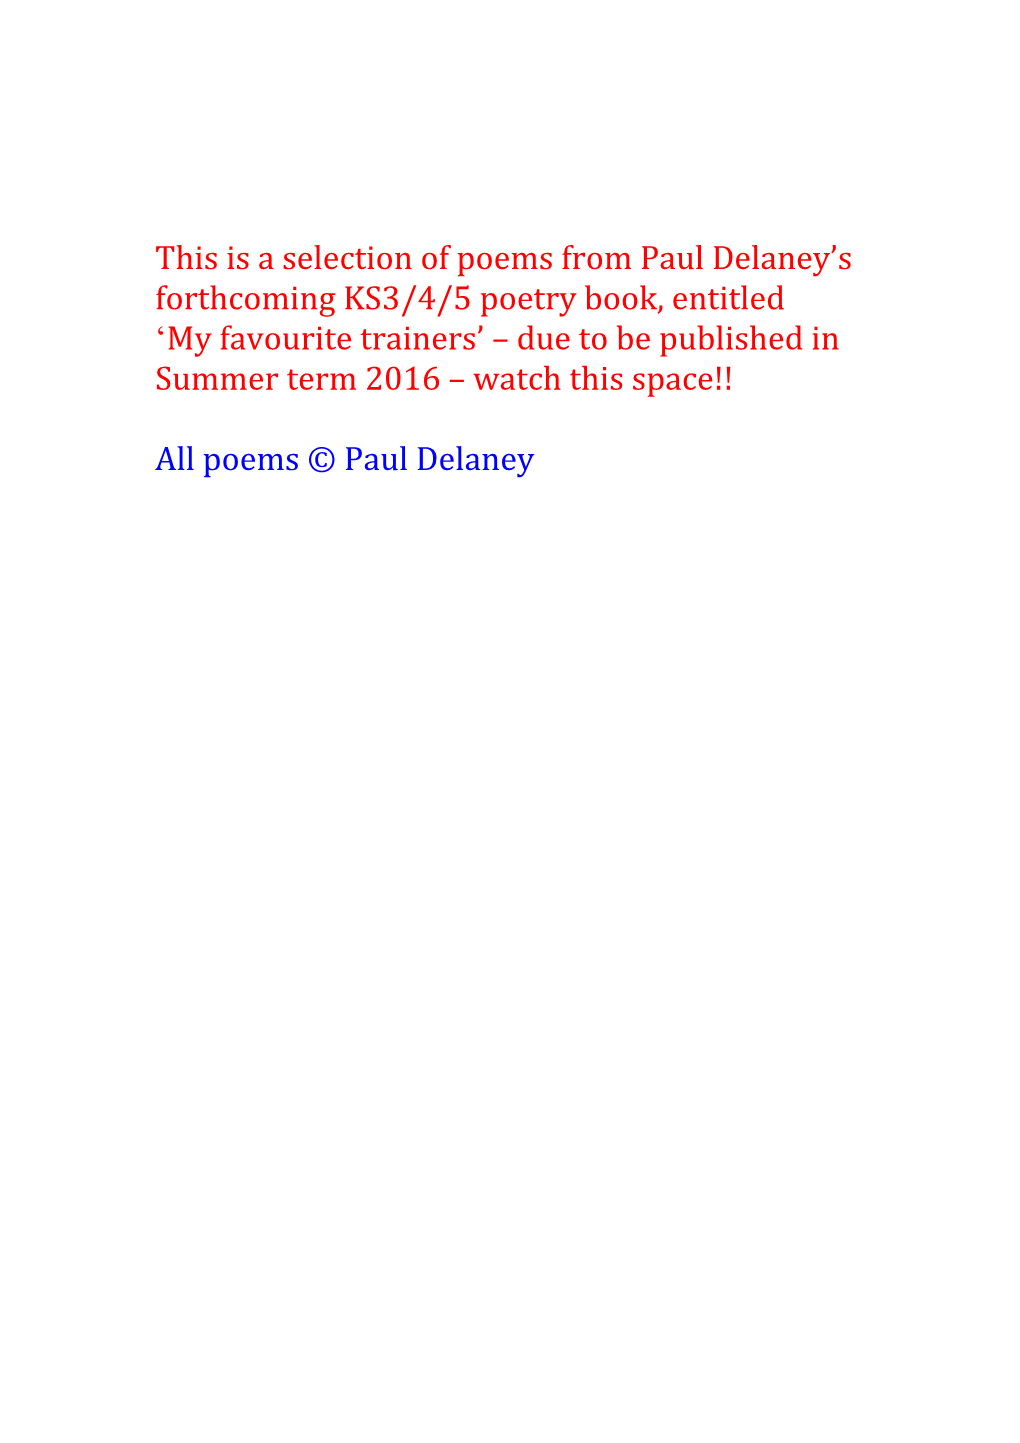 This Is a Selection of Poems from Paul Delaney S Forthcoming KS3/4/5 Poetry Book, Entitled